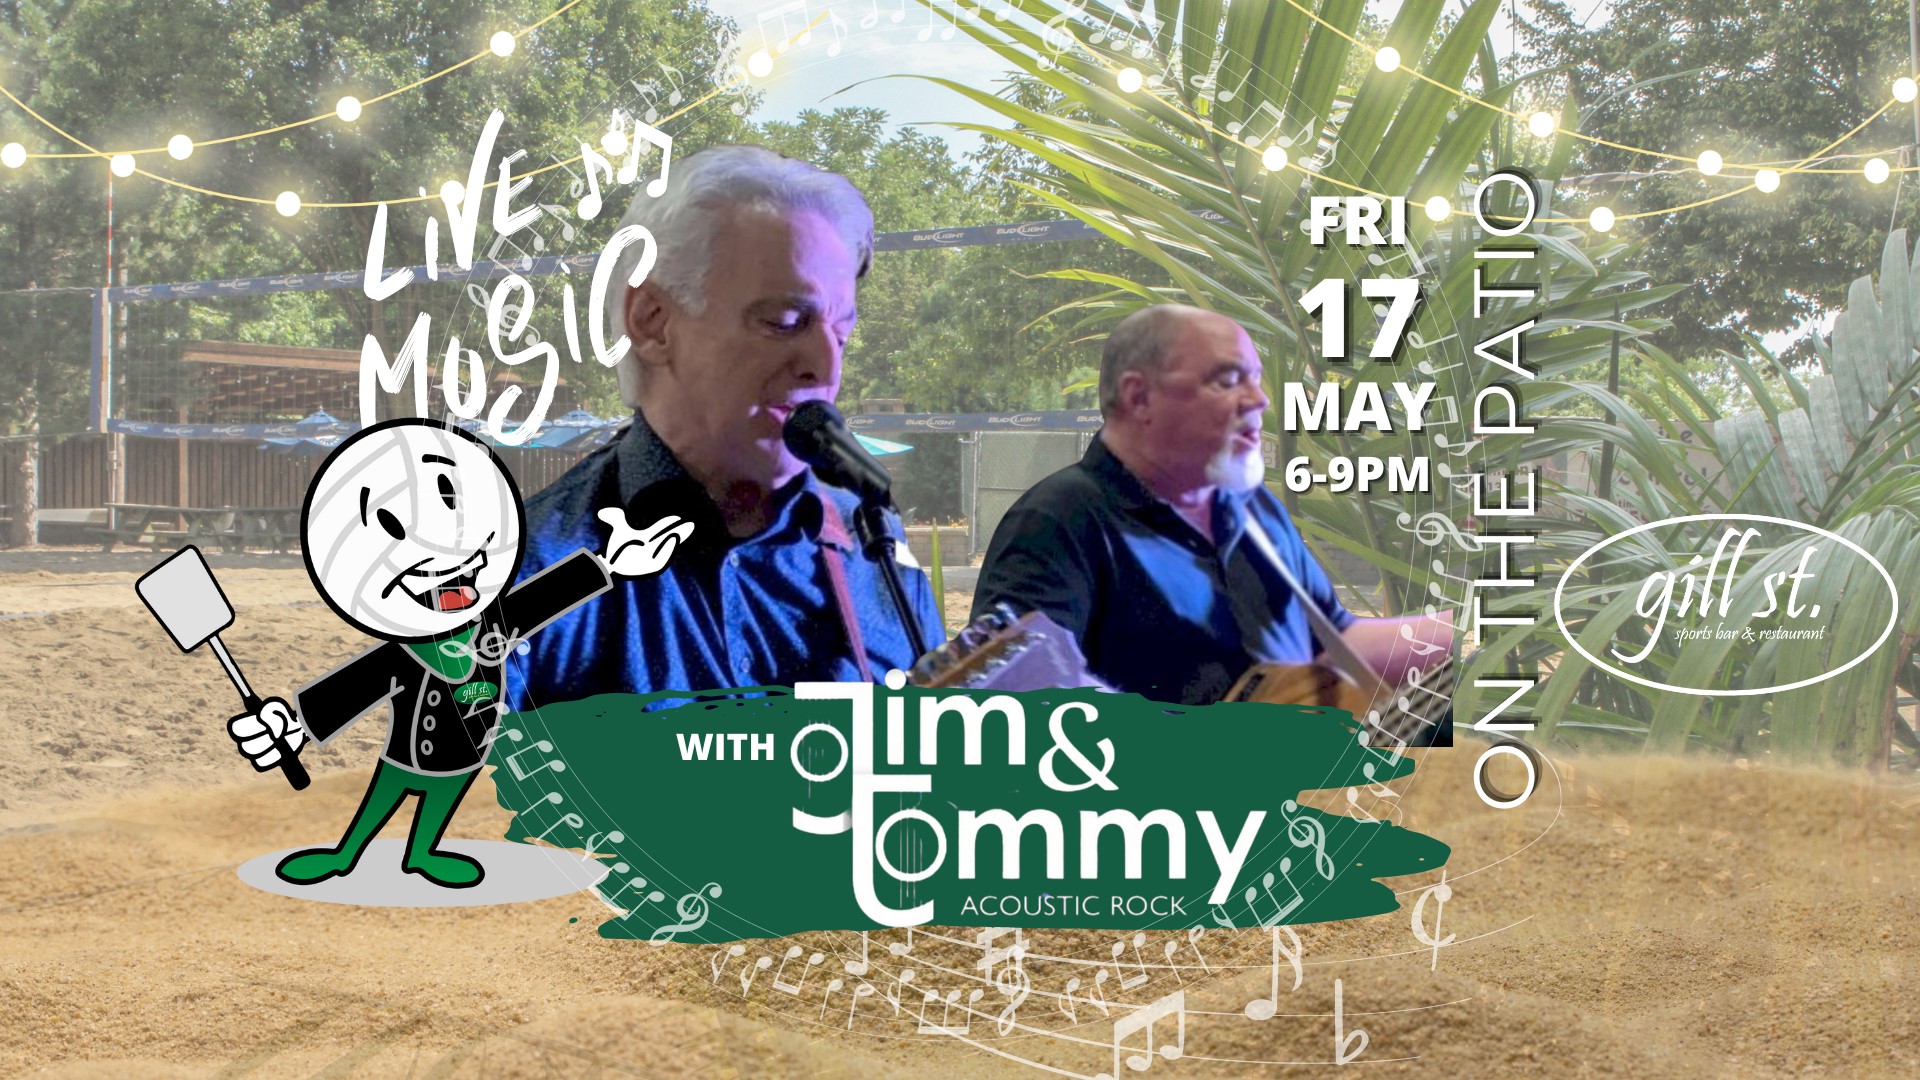 Live Music with Jim & Tommy